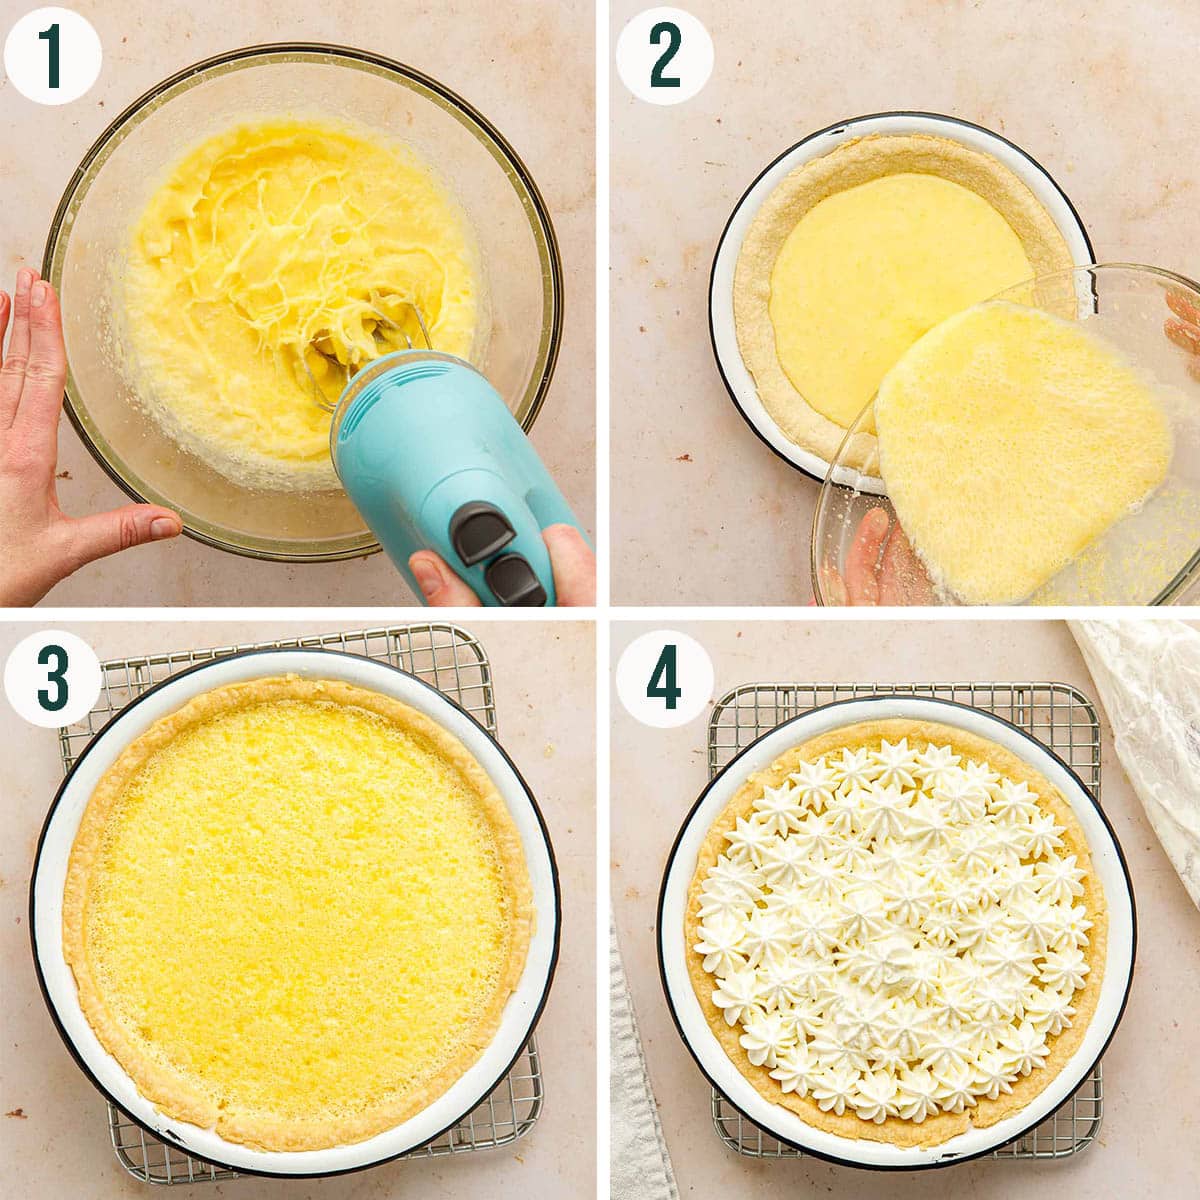 Lemon pie steps 1 to 4, mixing filling, baking, and topping with cream.